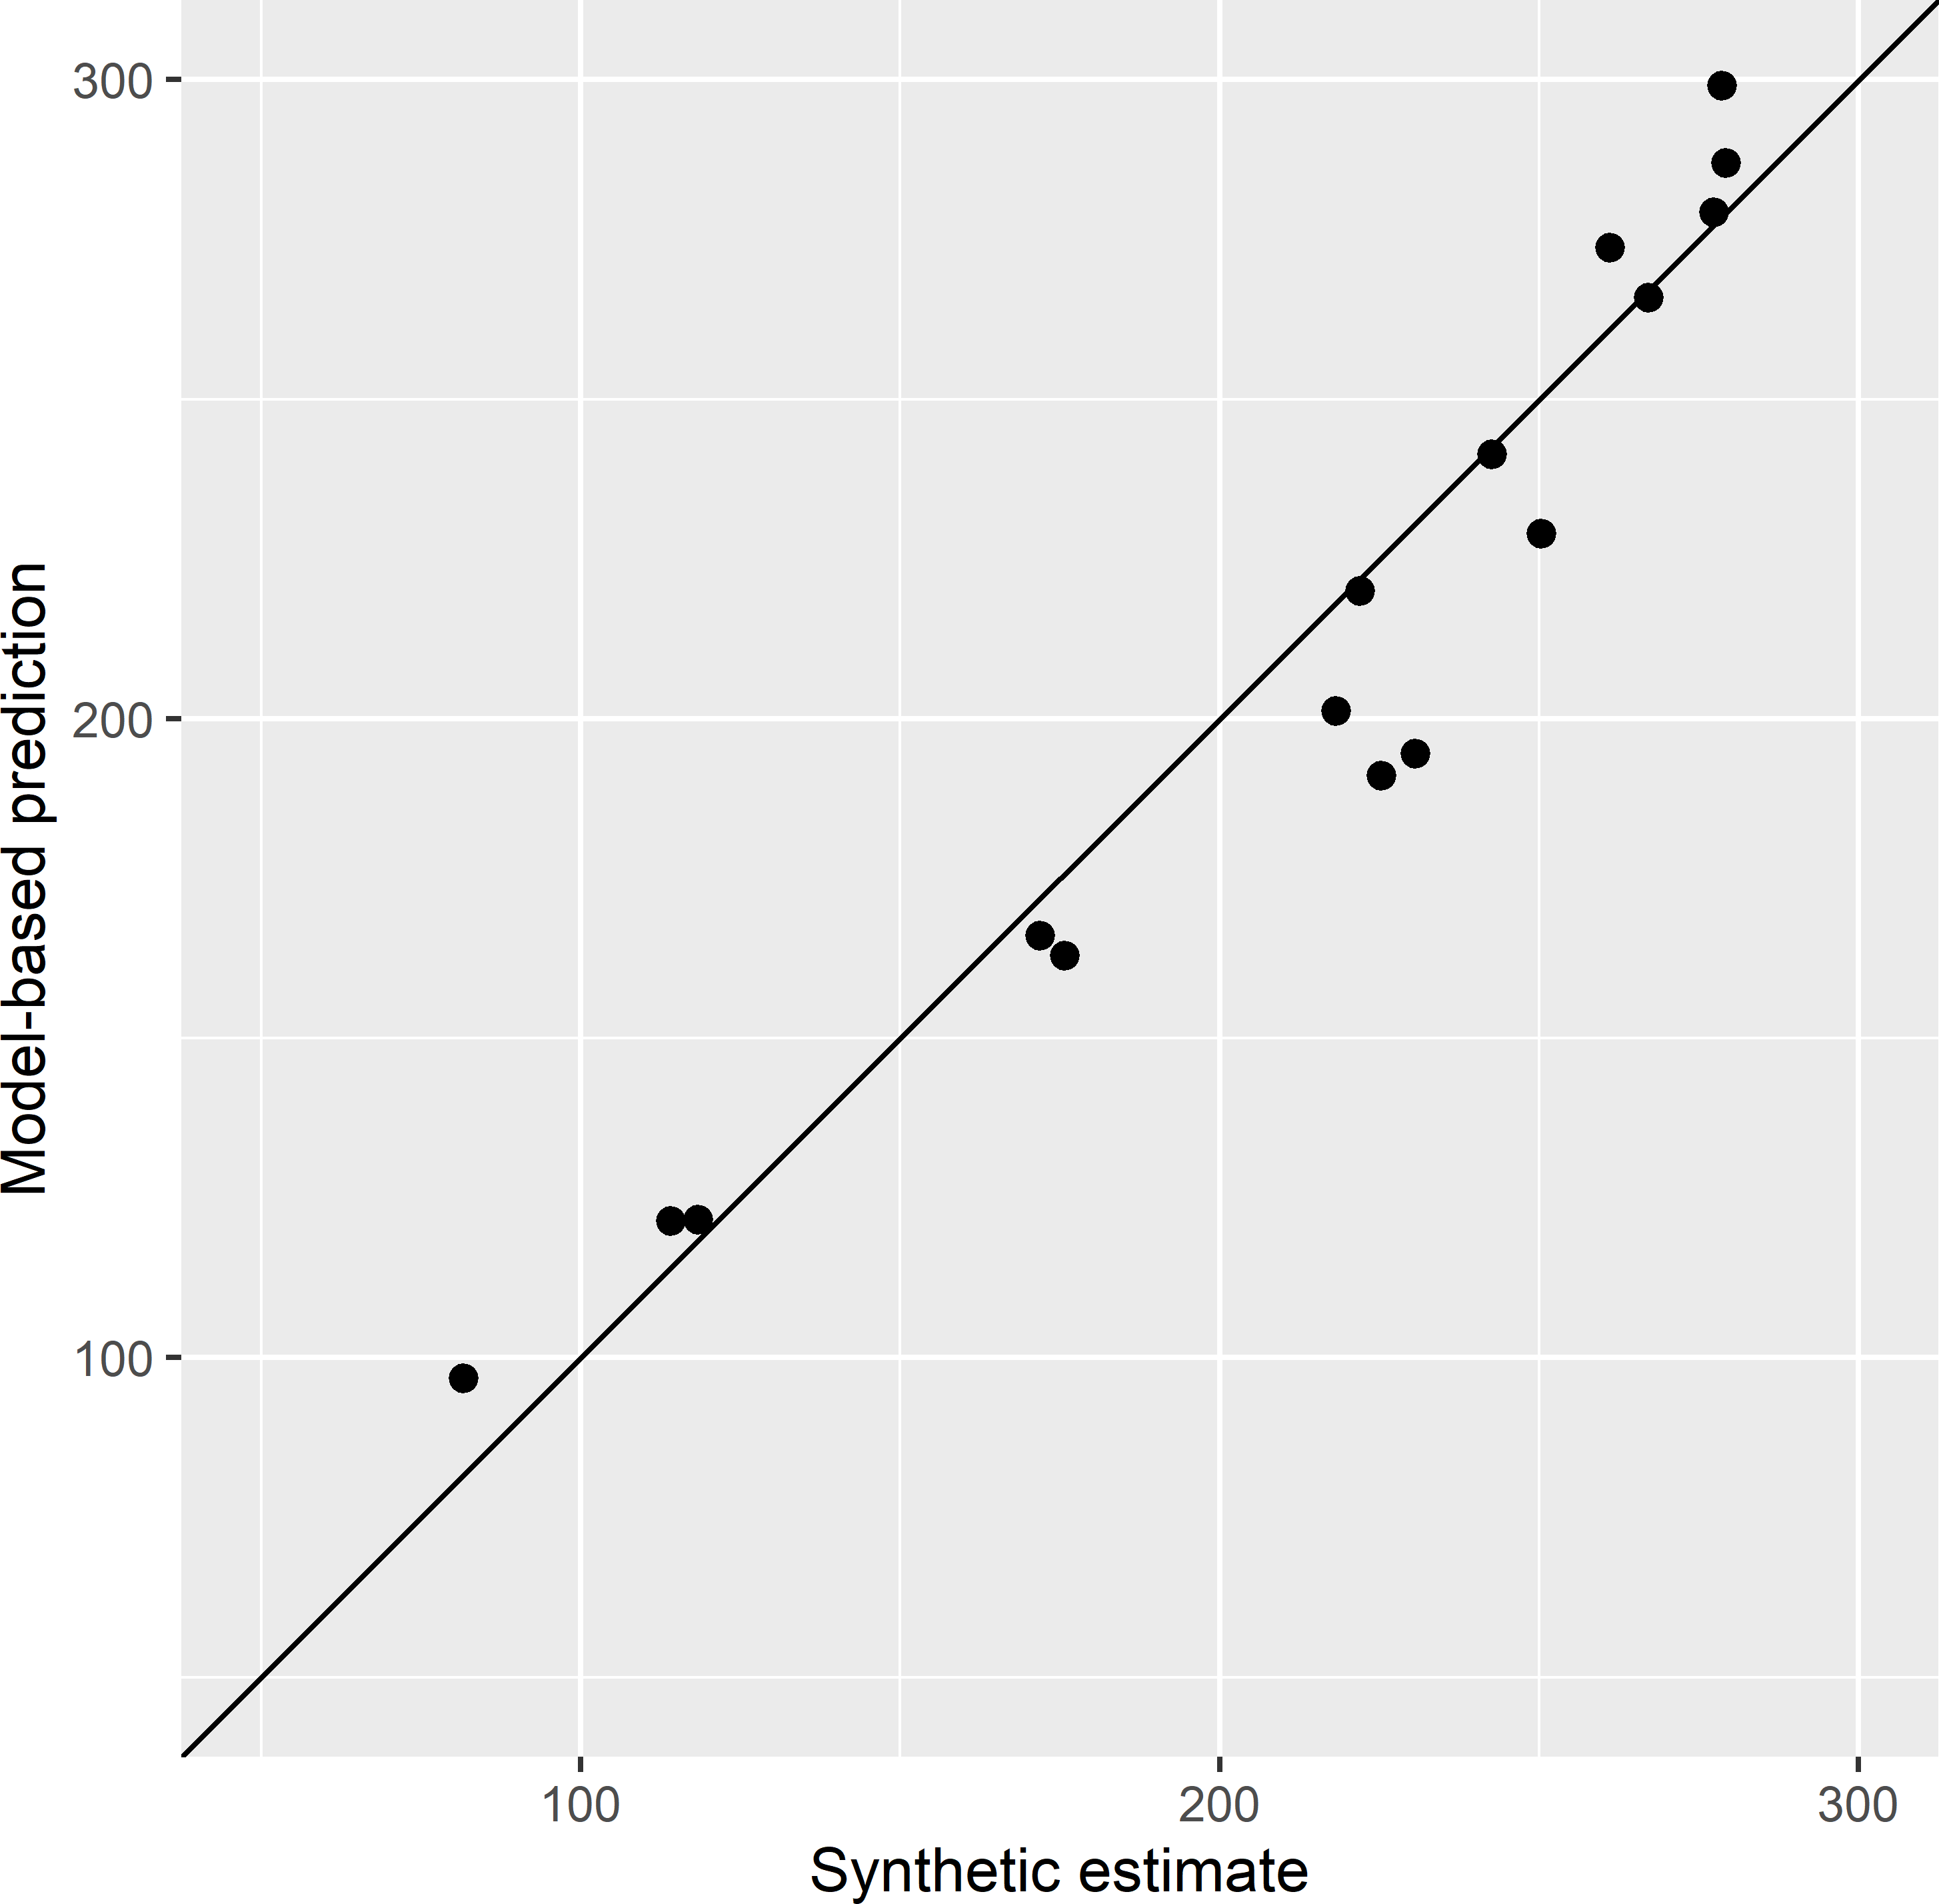 Scatter plot of the model-based prediction and the synthetic estimate of the mean AGB (109 kg ha-1) of ecoregions in Eastern Amazonia. The solid line is the 1:1 line.